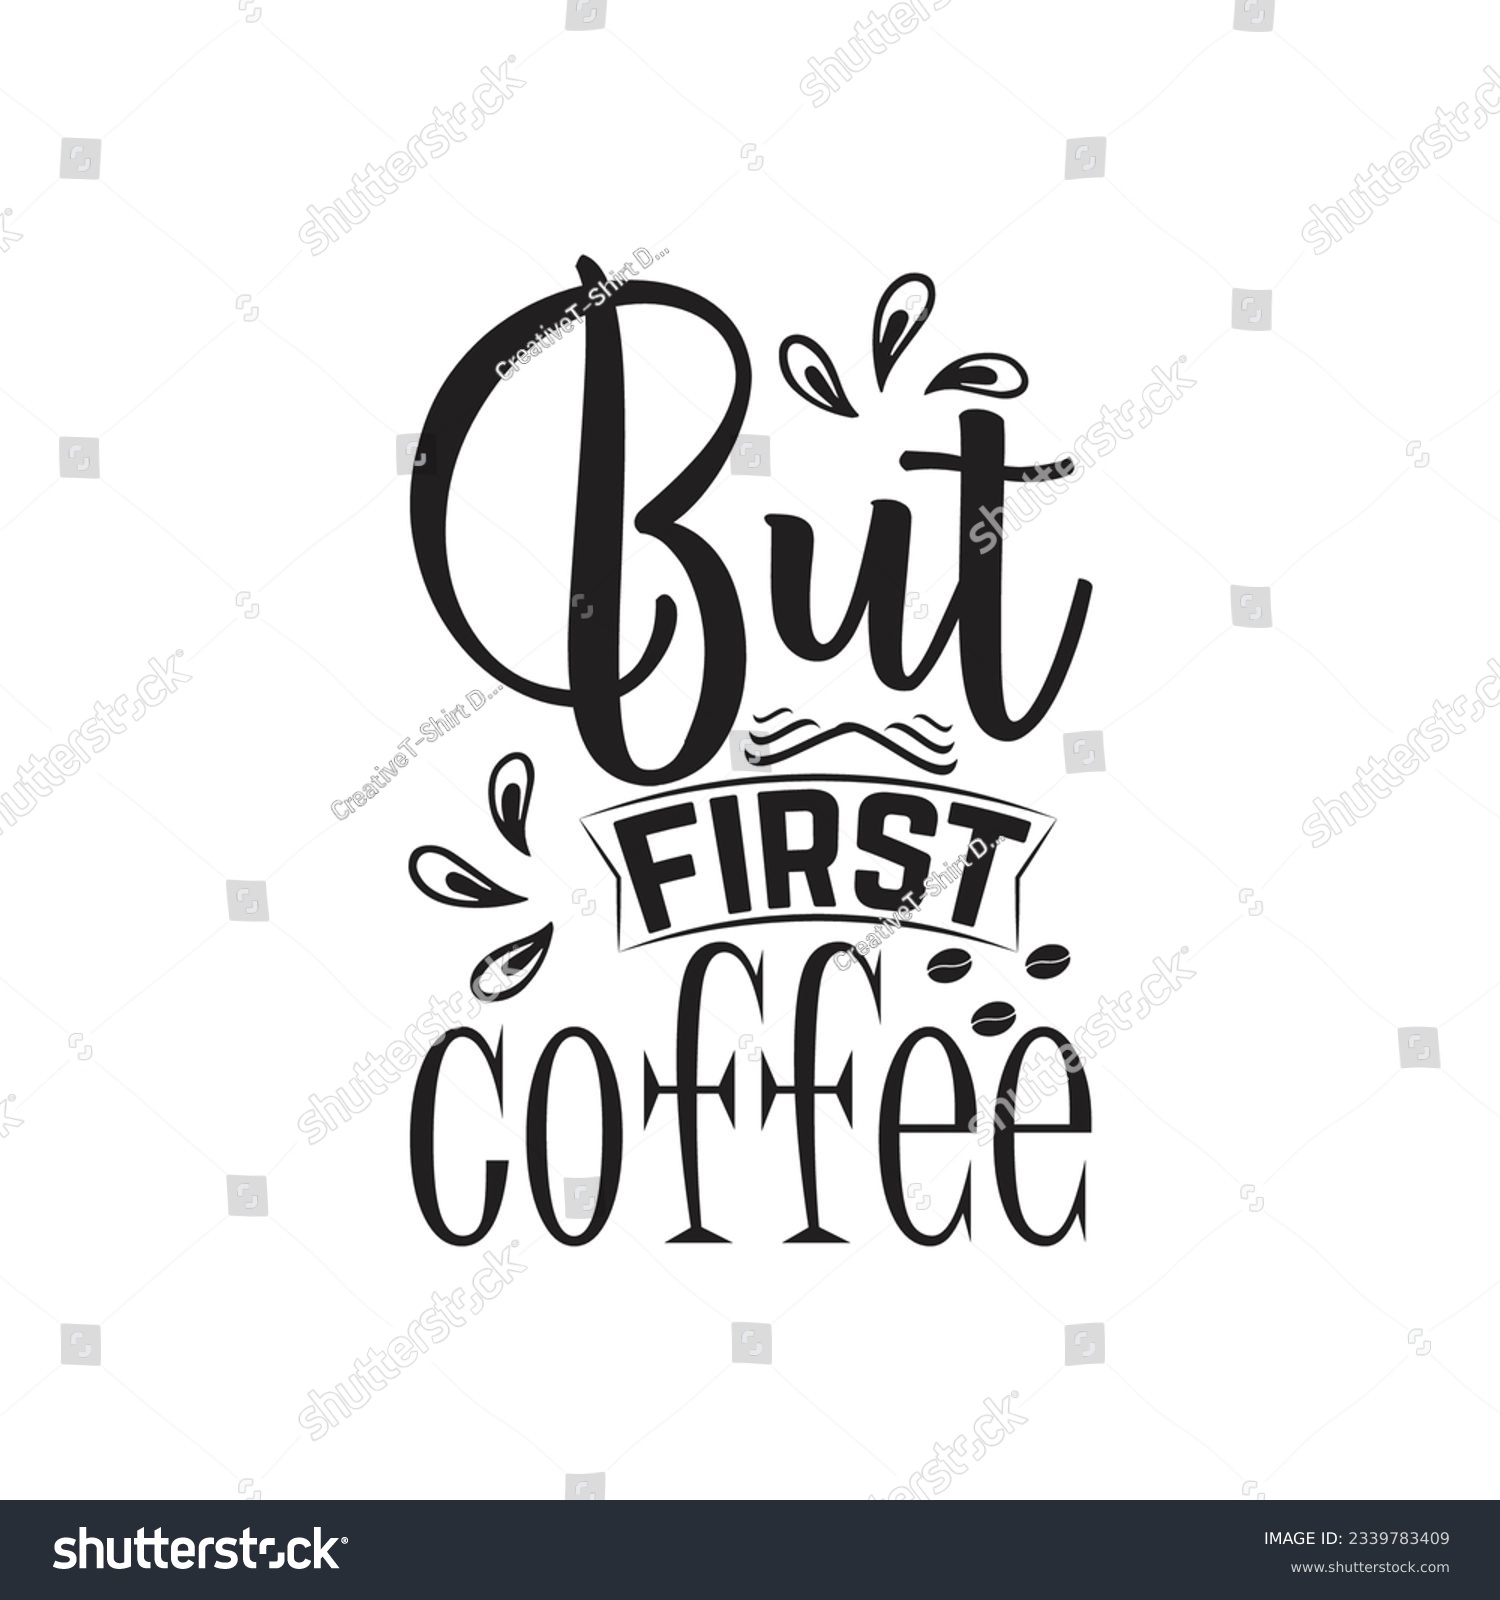 SVG of Coffee t shirt design with message But First Coffee  ,best coffee t shirt graphics, typography, coffee t -shirt design vector svg